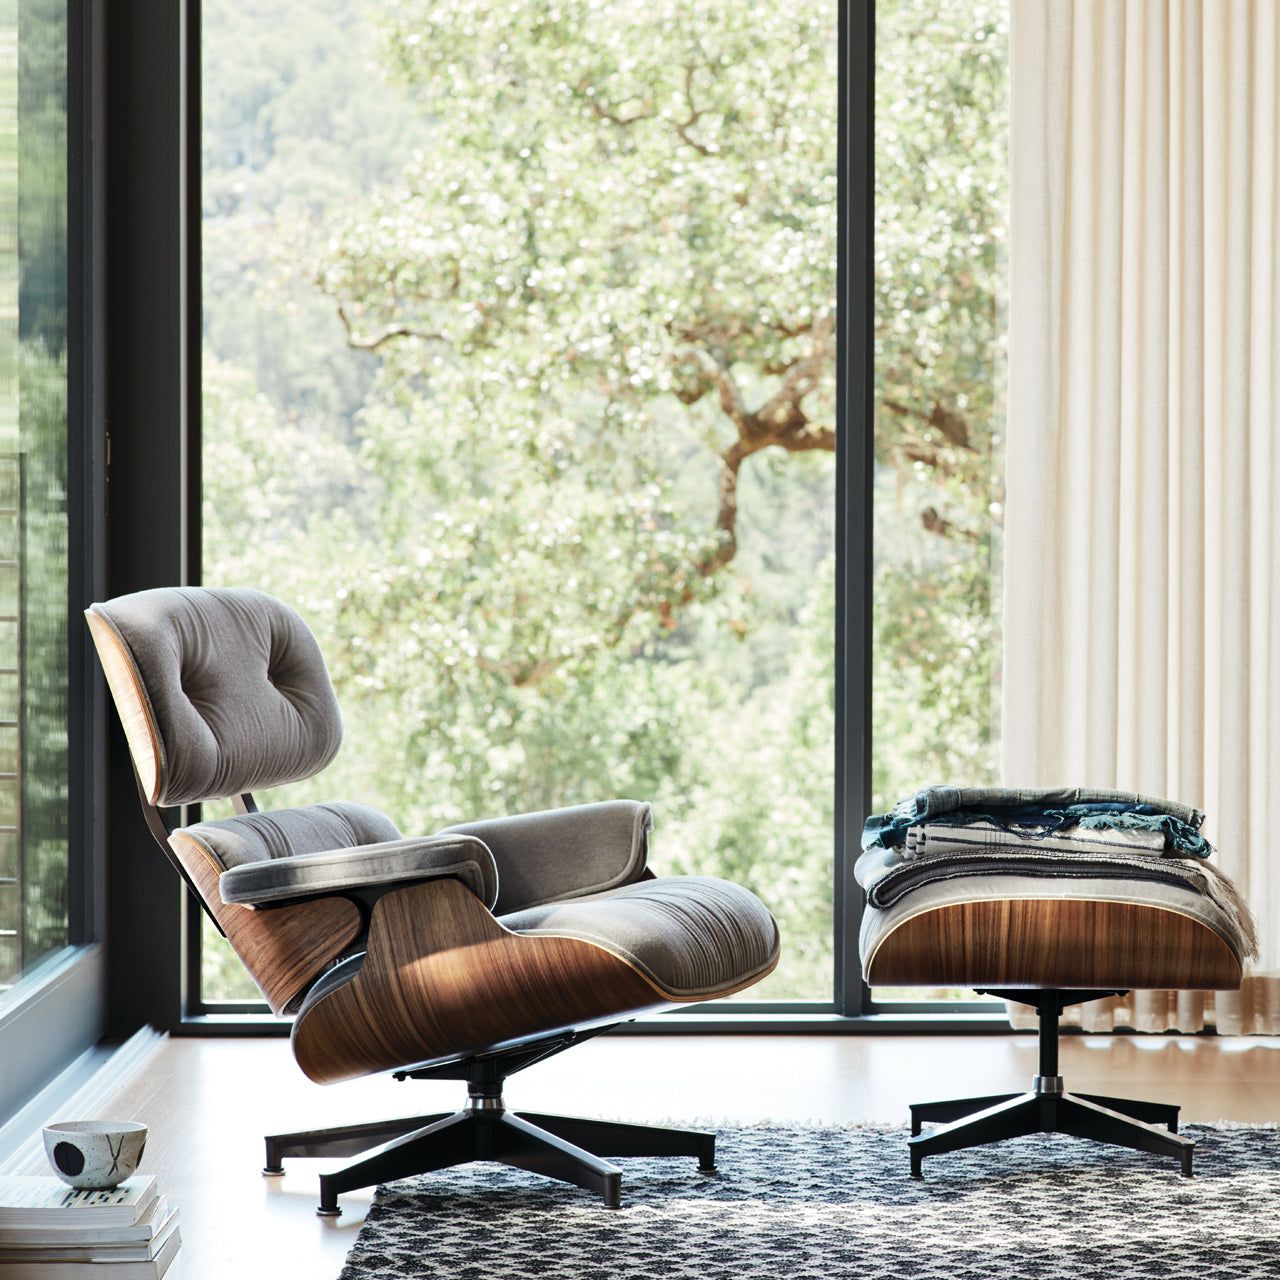 Lounge Chair And Ottoman The Ultimate Comfort Combo for Relaxing at Home